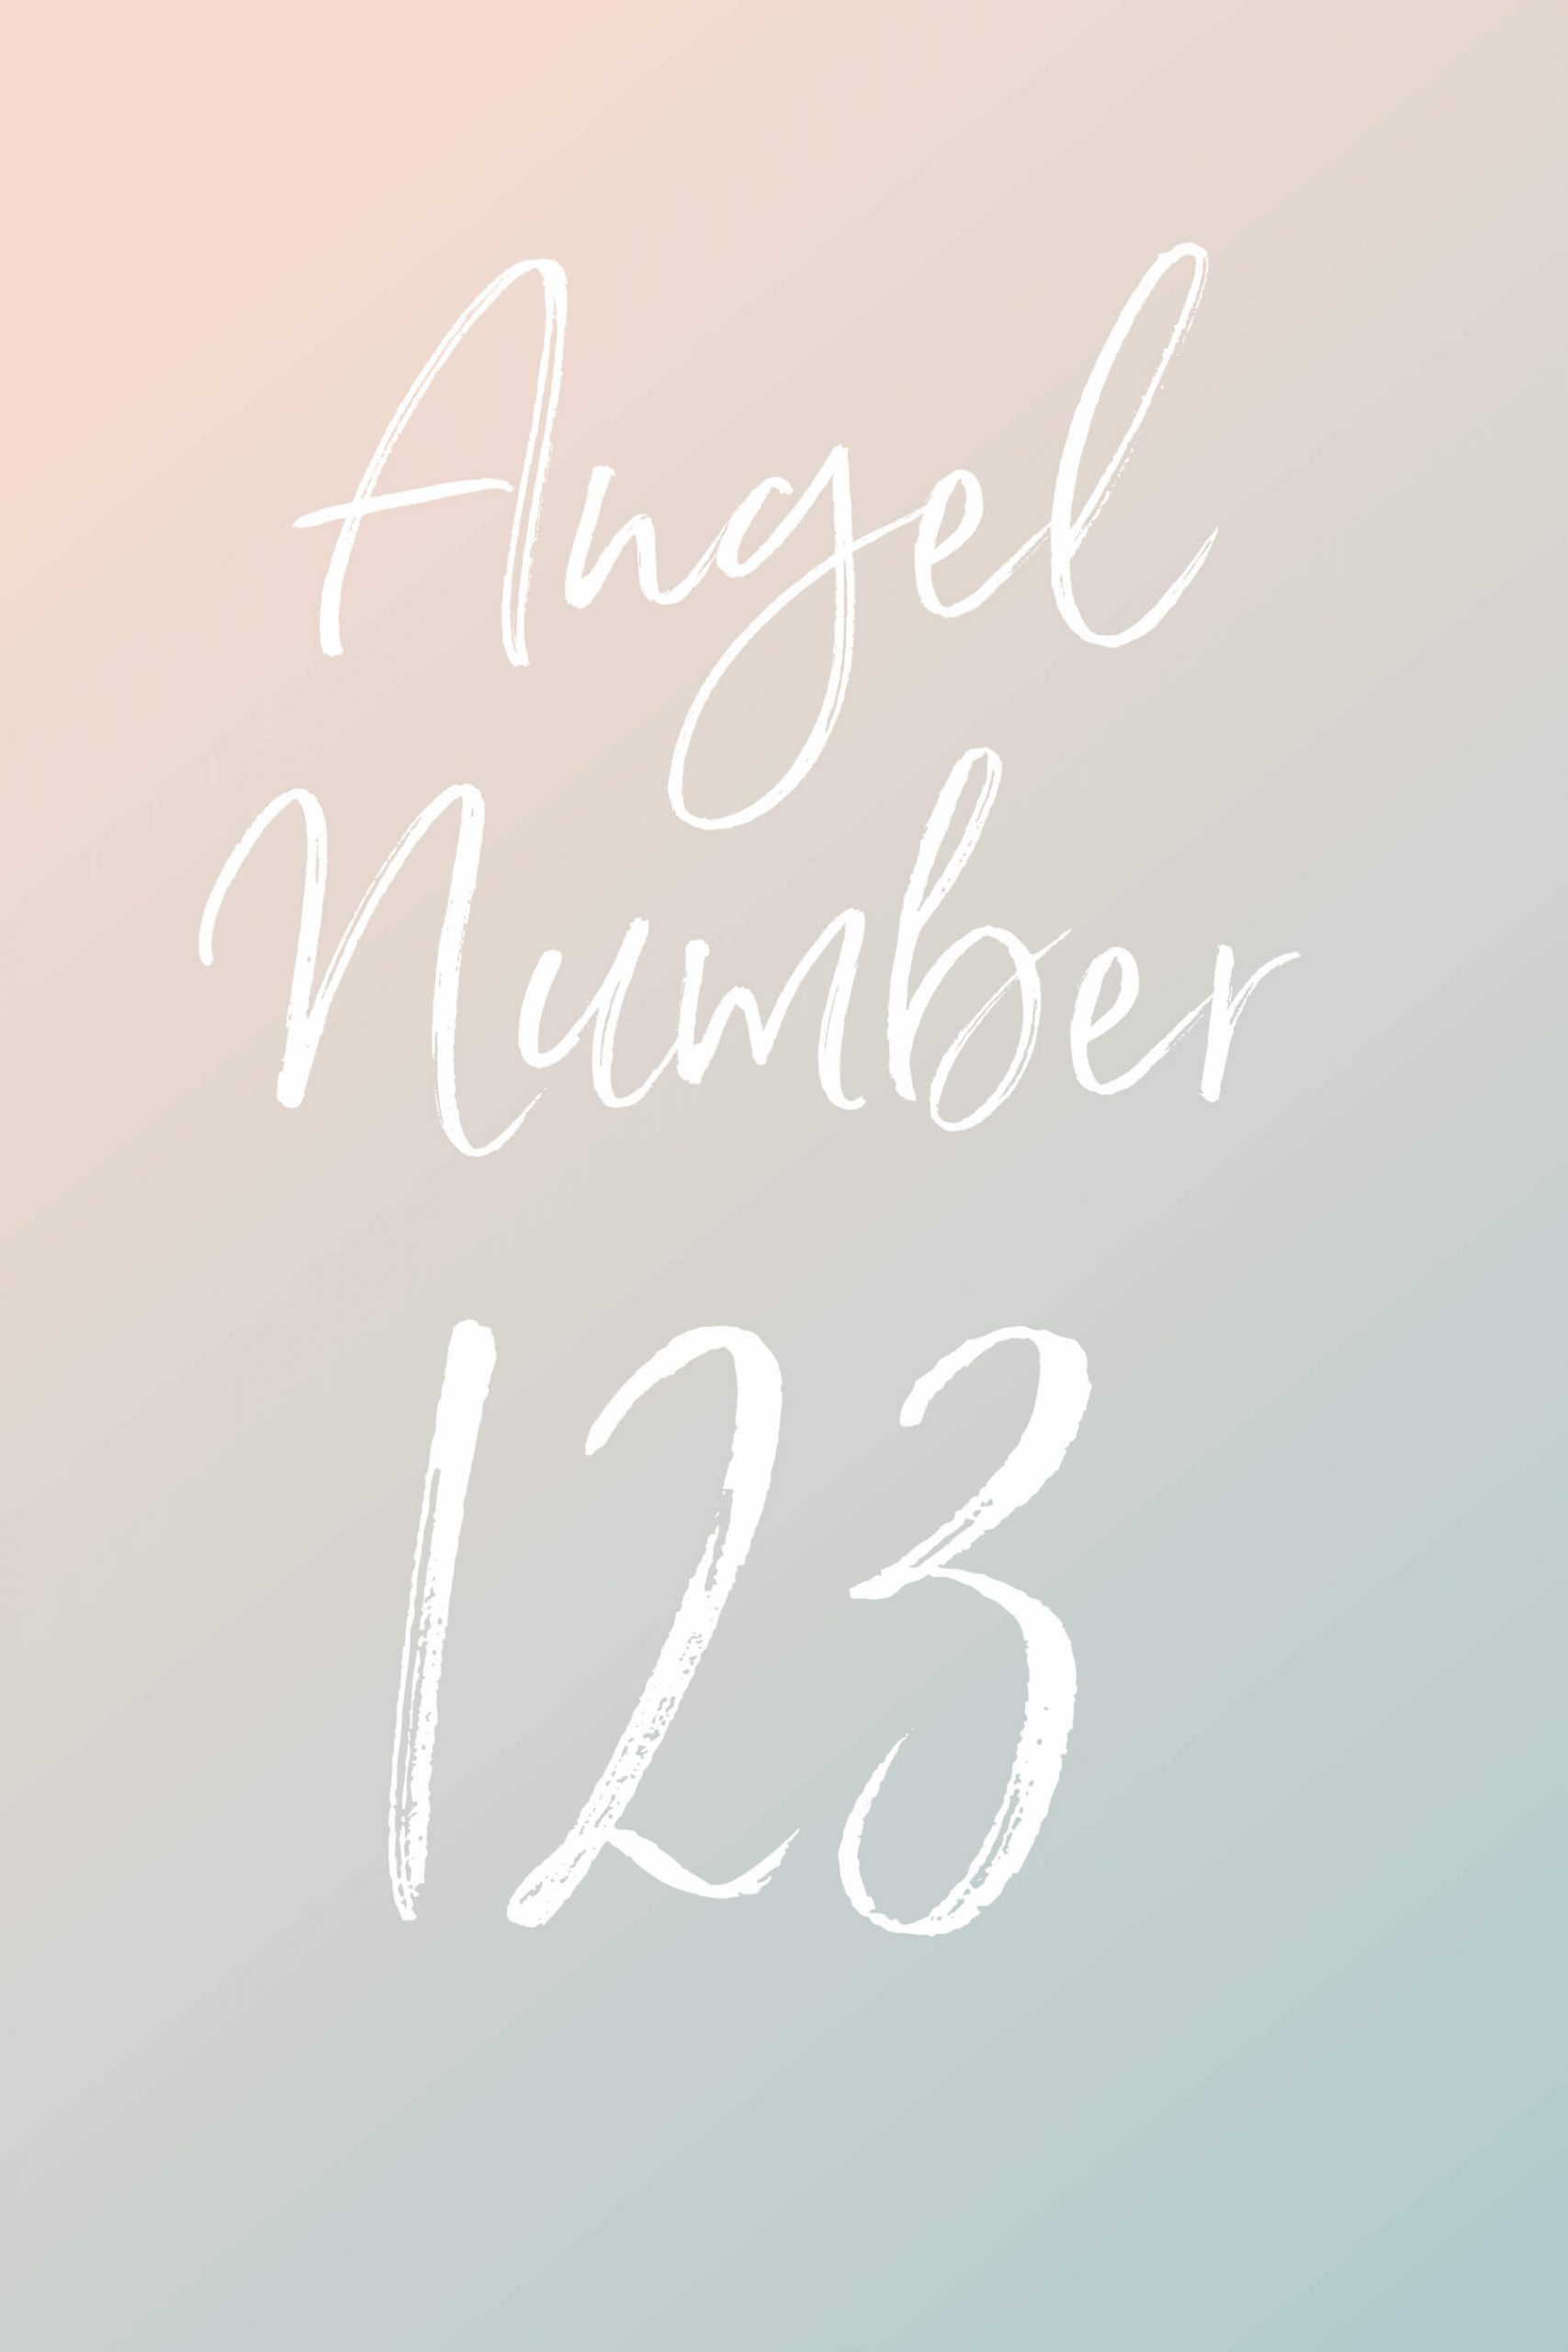 A pastel pink and blue background with white text overlay that reads "angel number 123"